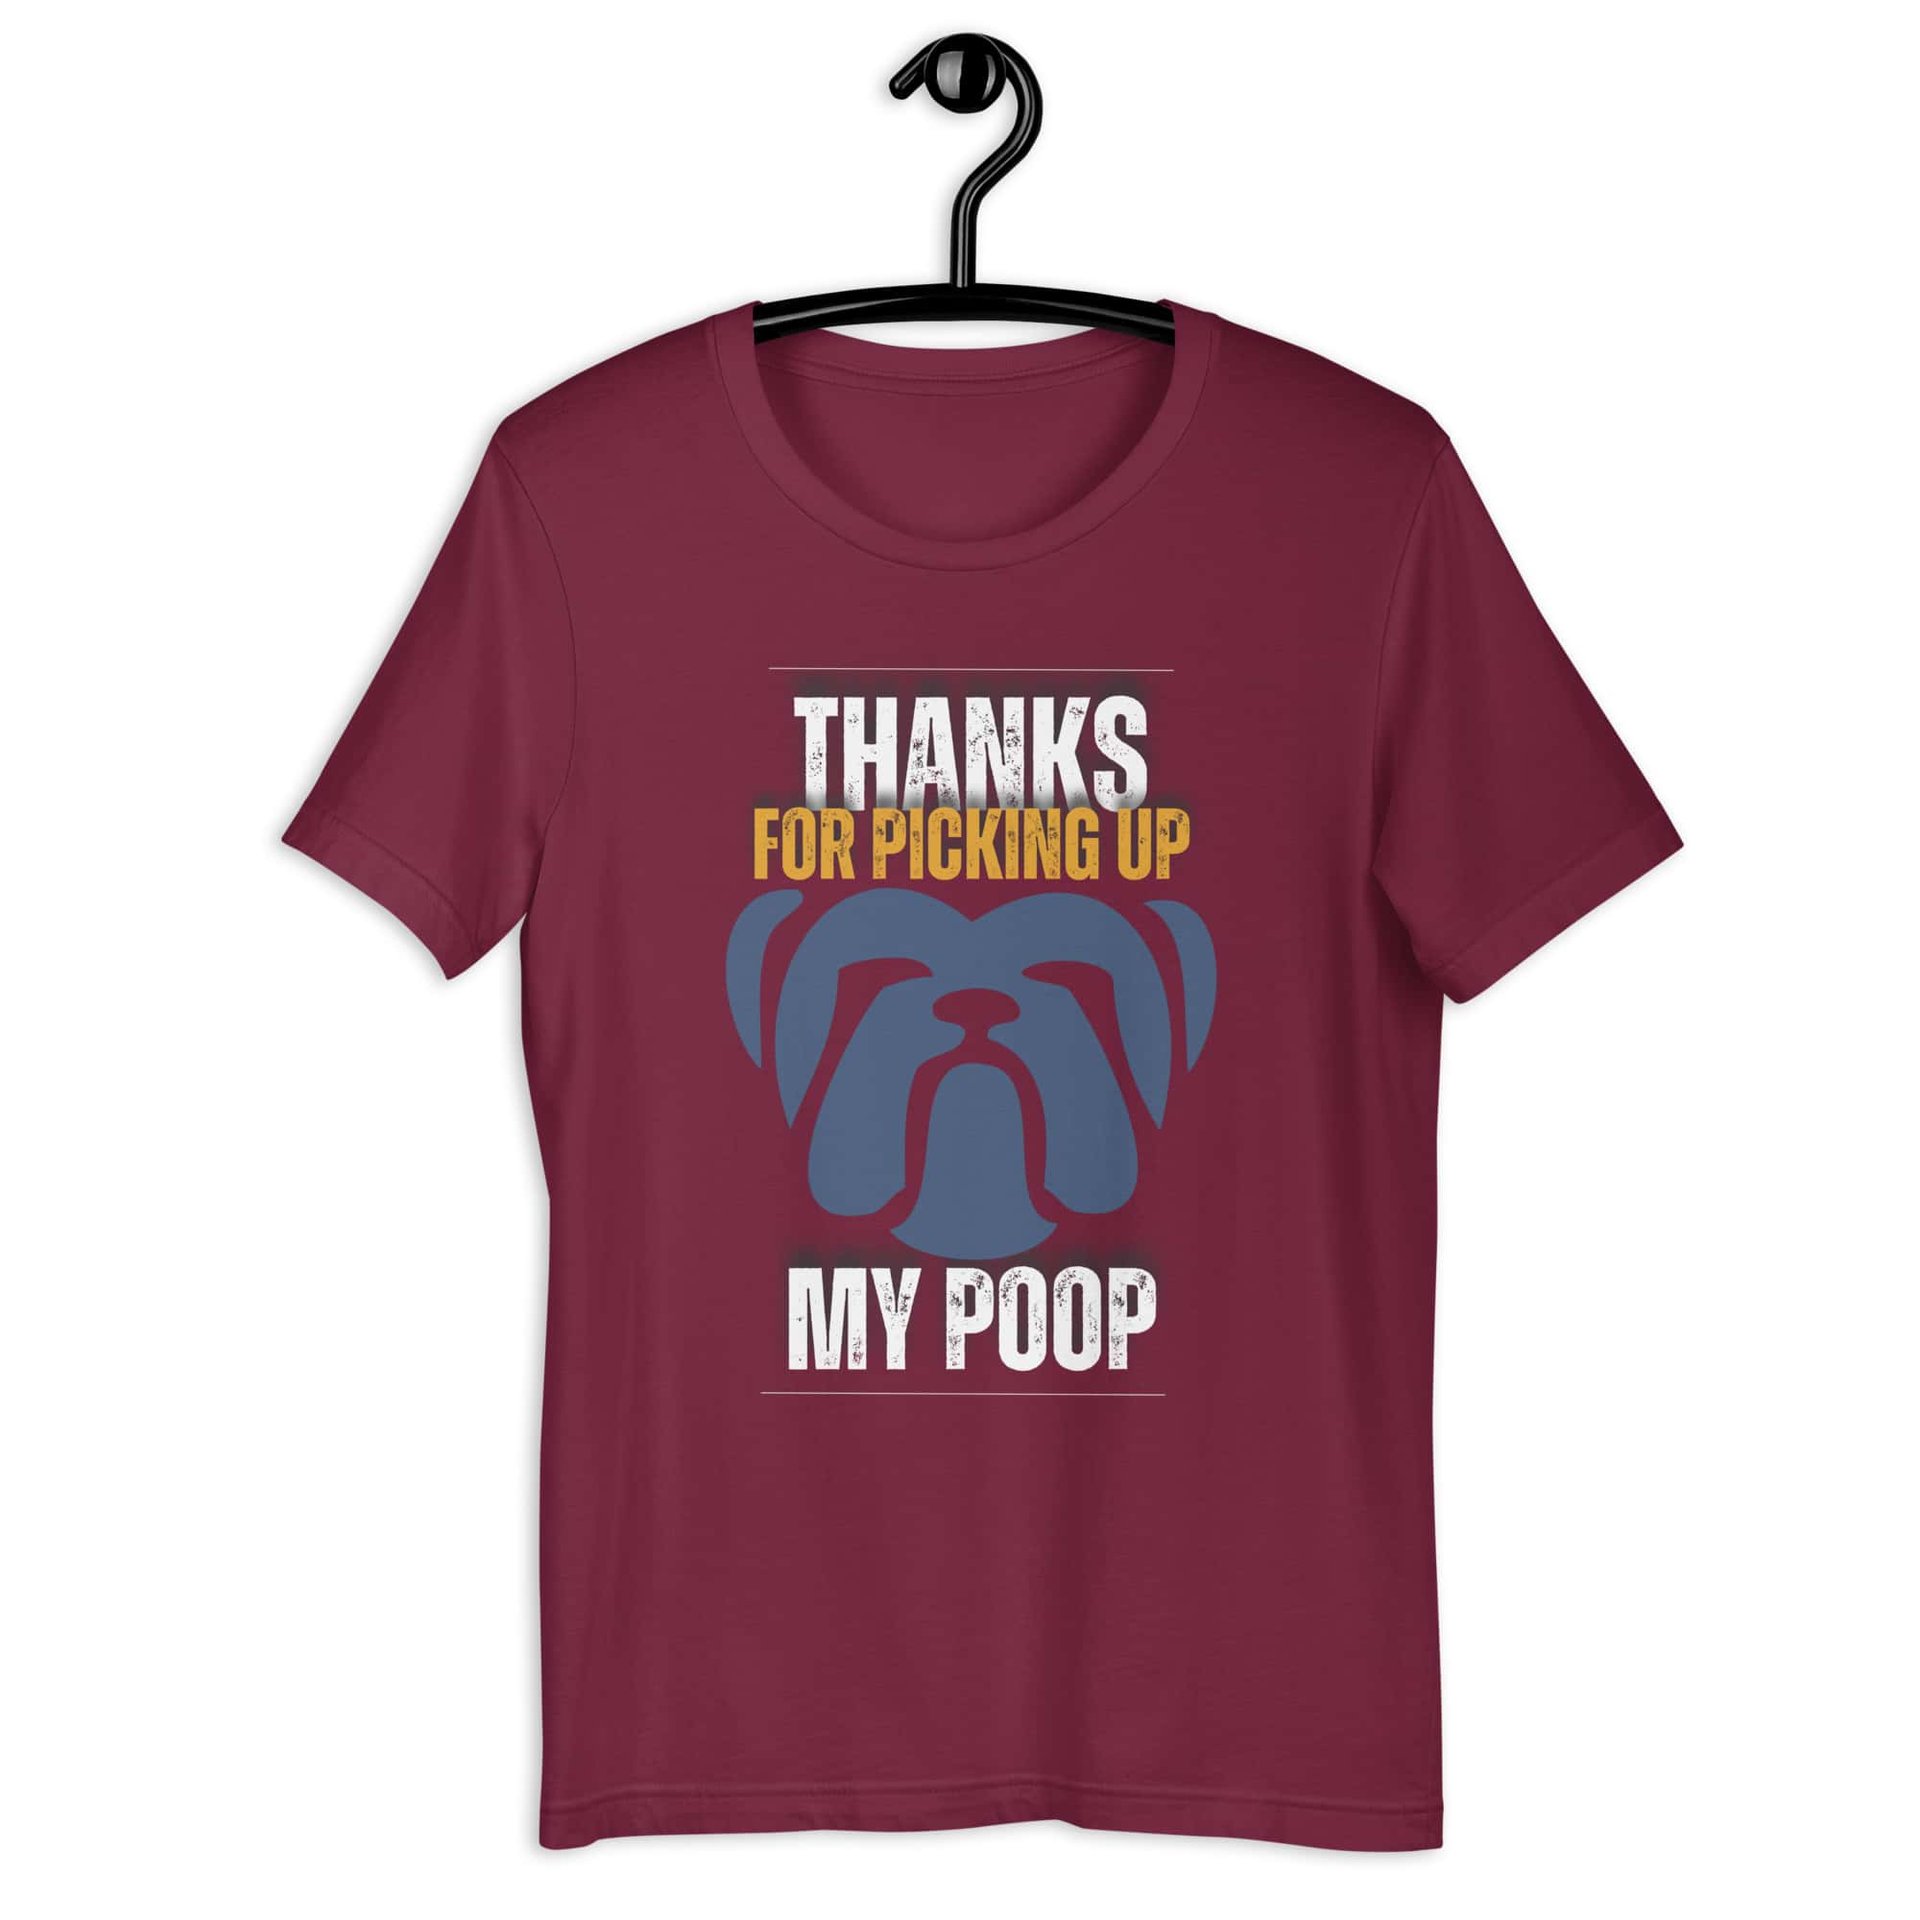 Thanks For Picking Up My POOP Funny Bulldog Unisex T-Shirt. Maroon